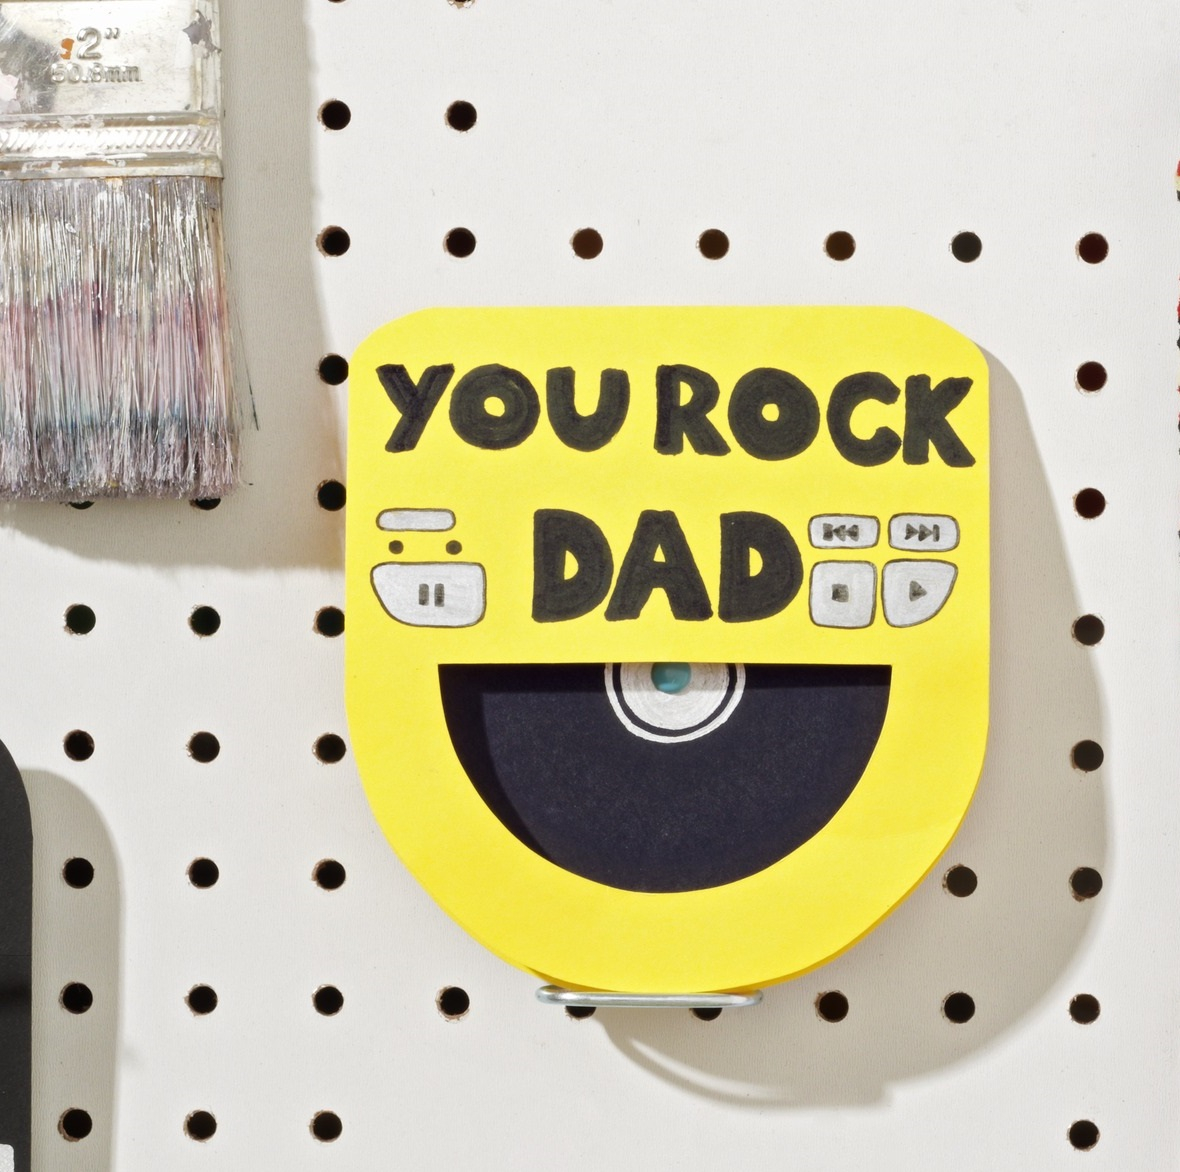 Homemade Card Ideas For Dads Birthday Fathers Day Crafts For Kids 21 Too Cute Gift Ideas For Dad Parents